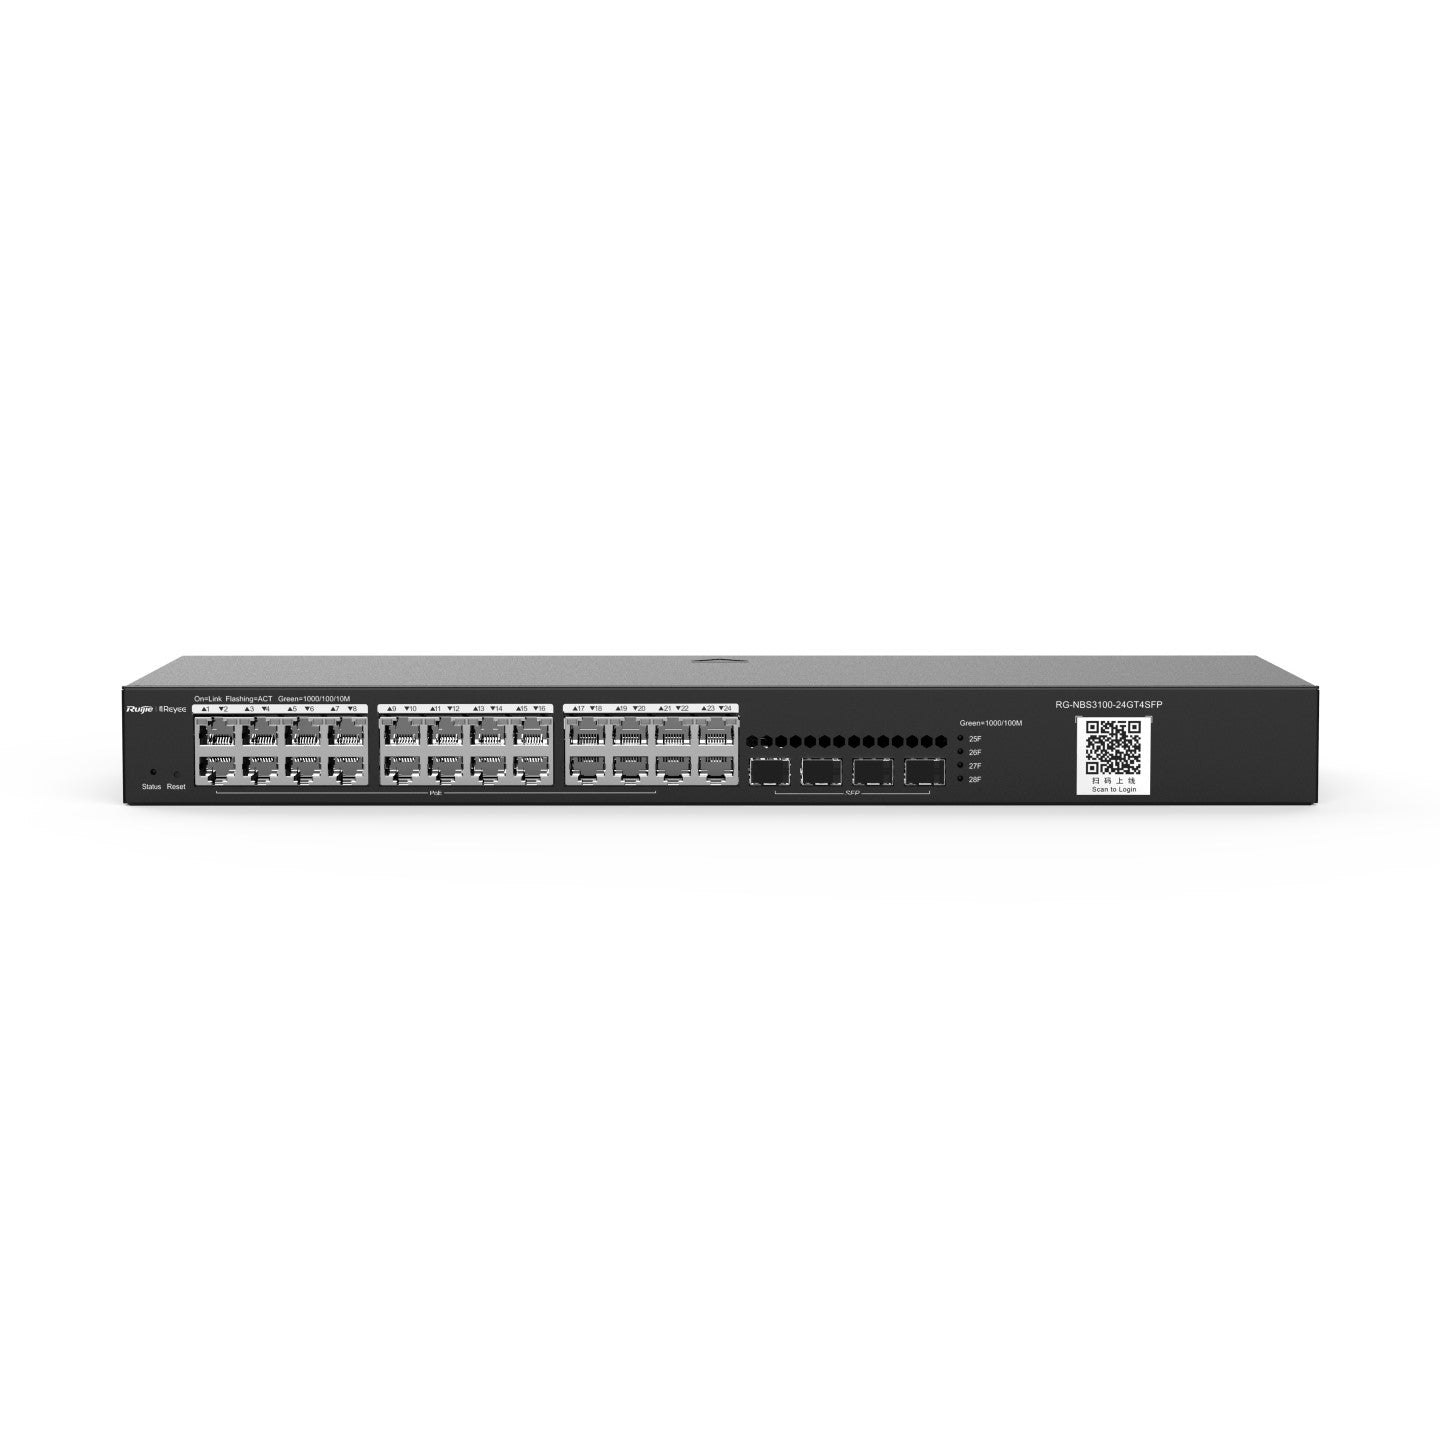 Ruijie RG-NBS3100-24GT4SFP, 28-Port Gigabit Layer 2 Cloud Managed Non-PoE Switch